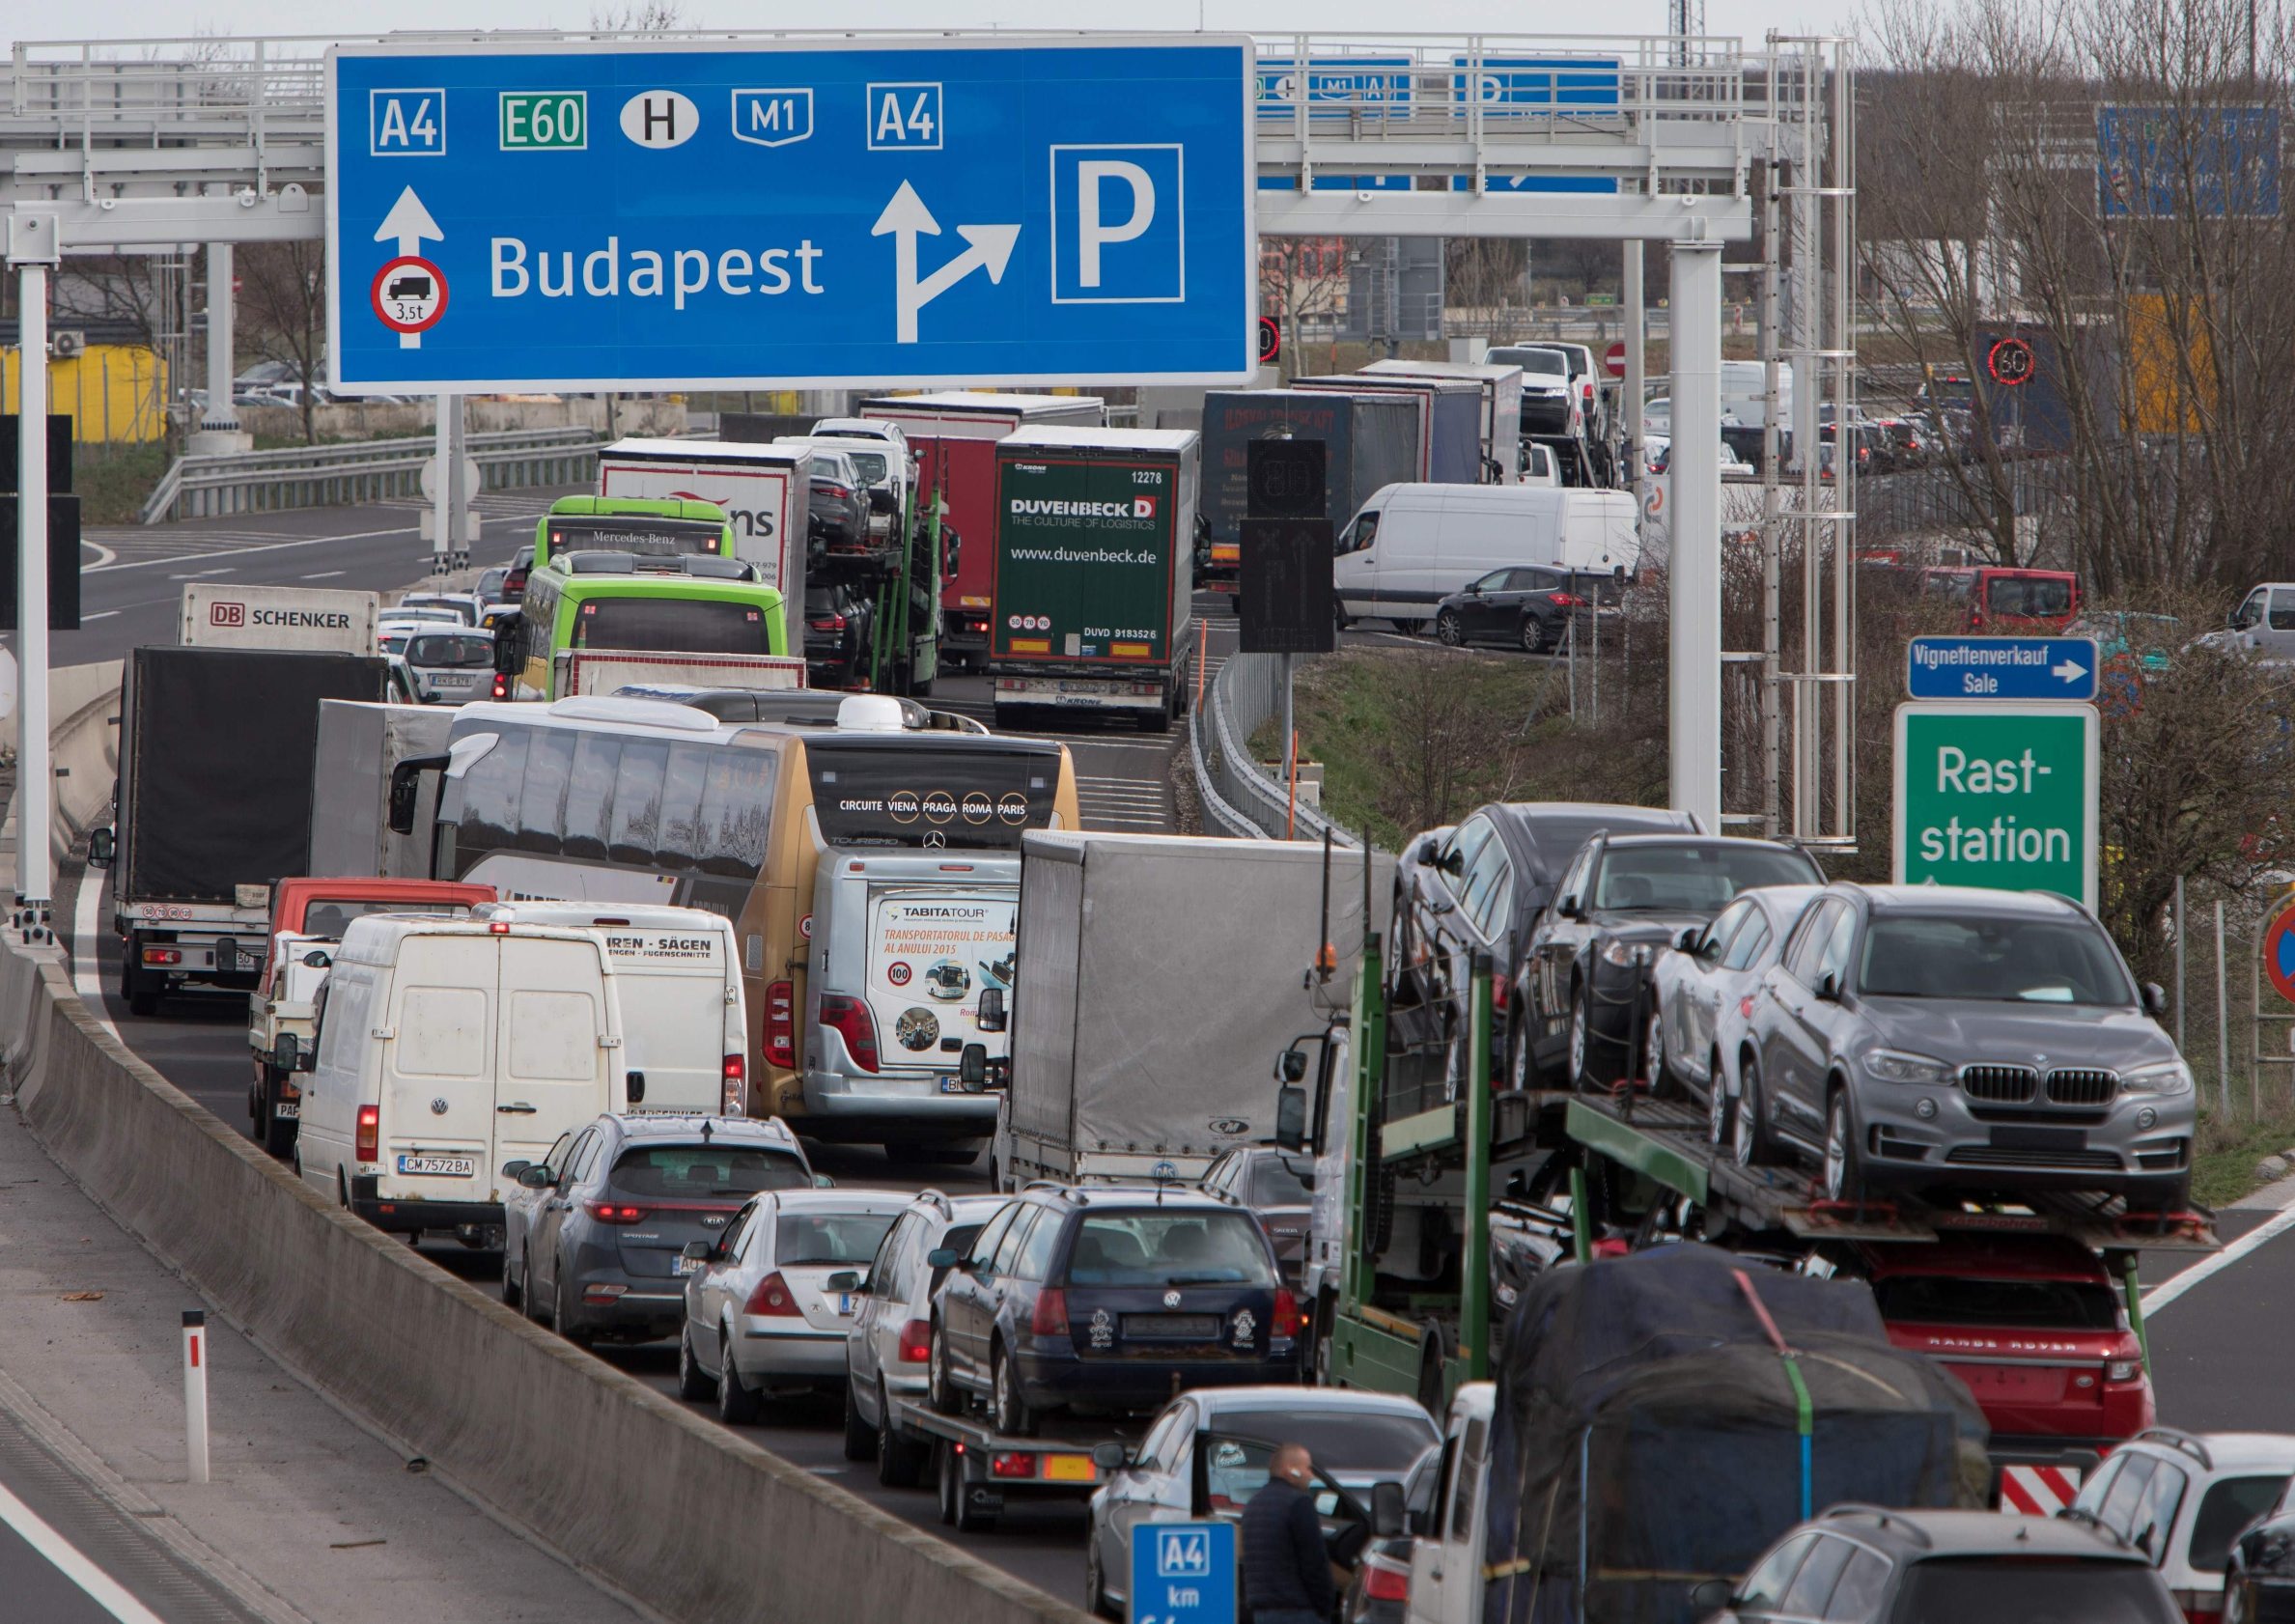 Drivers wait in the traffic jams on the A4 motorway towards Hungary, before the Nickelsdorf/Hegyeshalom border between Austria and Hungary on March 14, 2020 as border controls have been implemented to limit the spread of the novel coronavirus. - So far, Hungary has confirmed 19 cases of infections, nine of them Iranians (mostly university scholarship-holders), one British national, and the rest Hungarians. (Photo by ALEX HALADA / AFP)